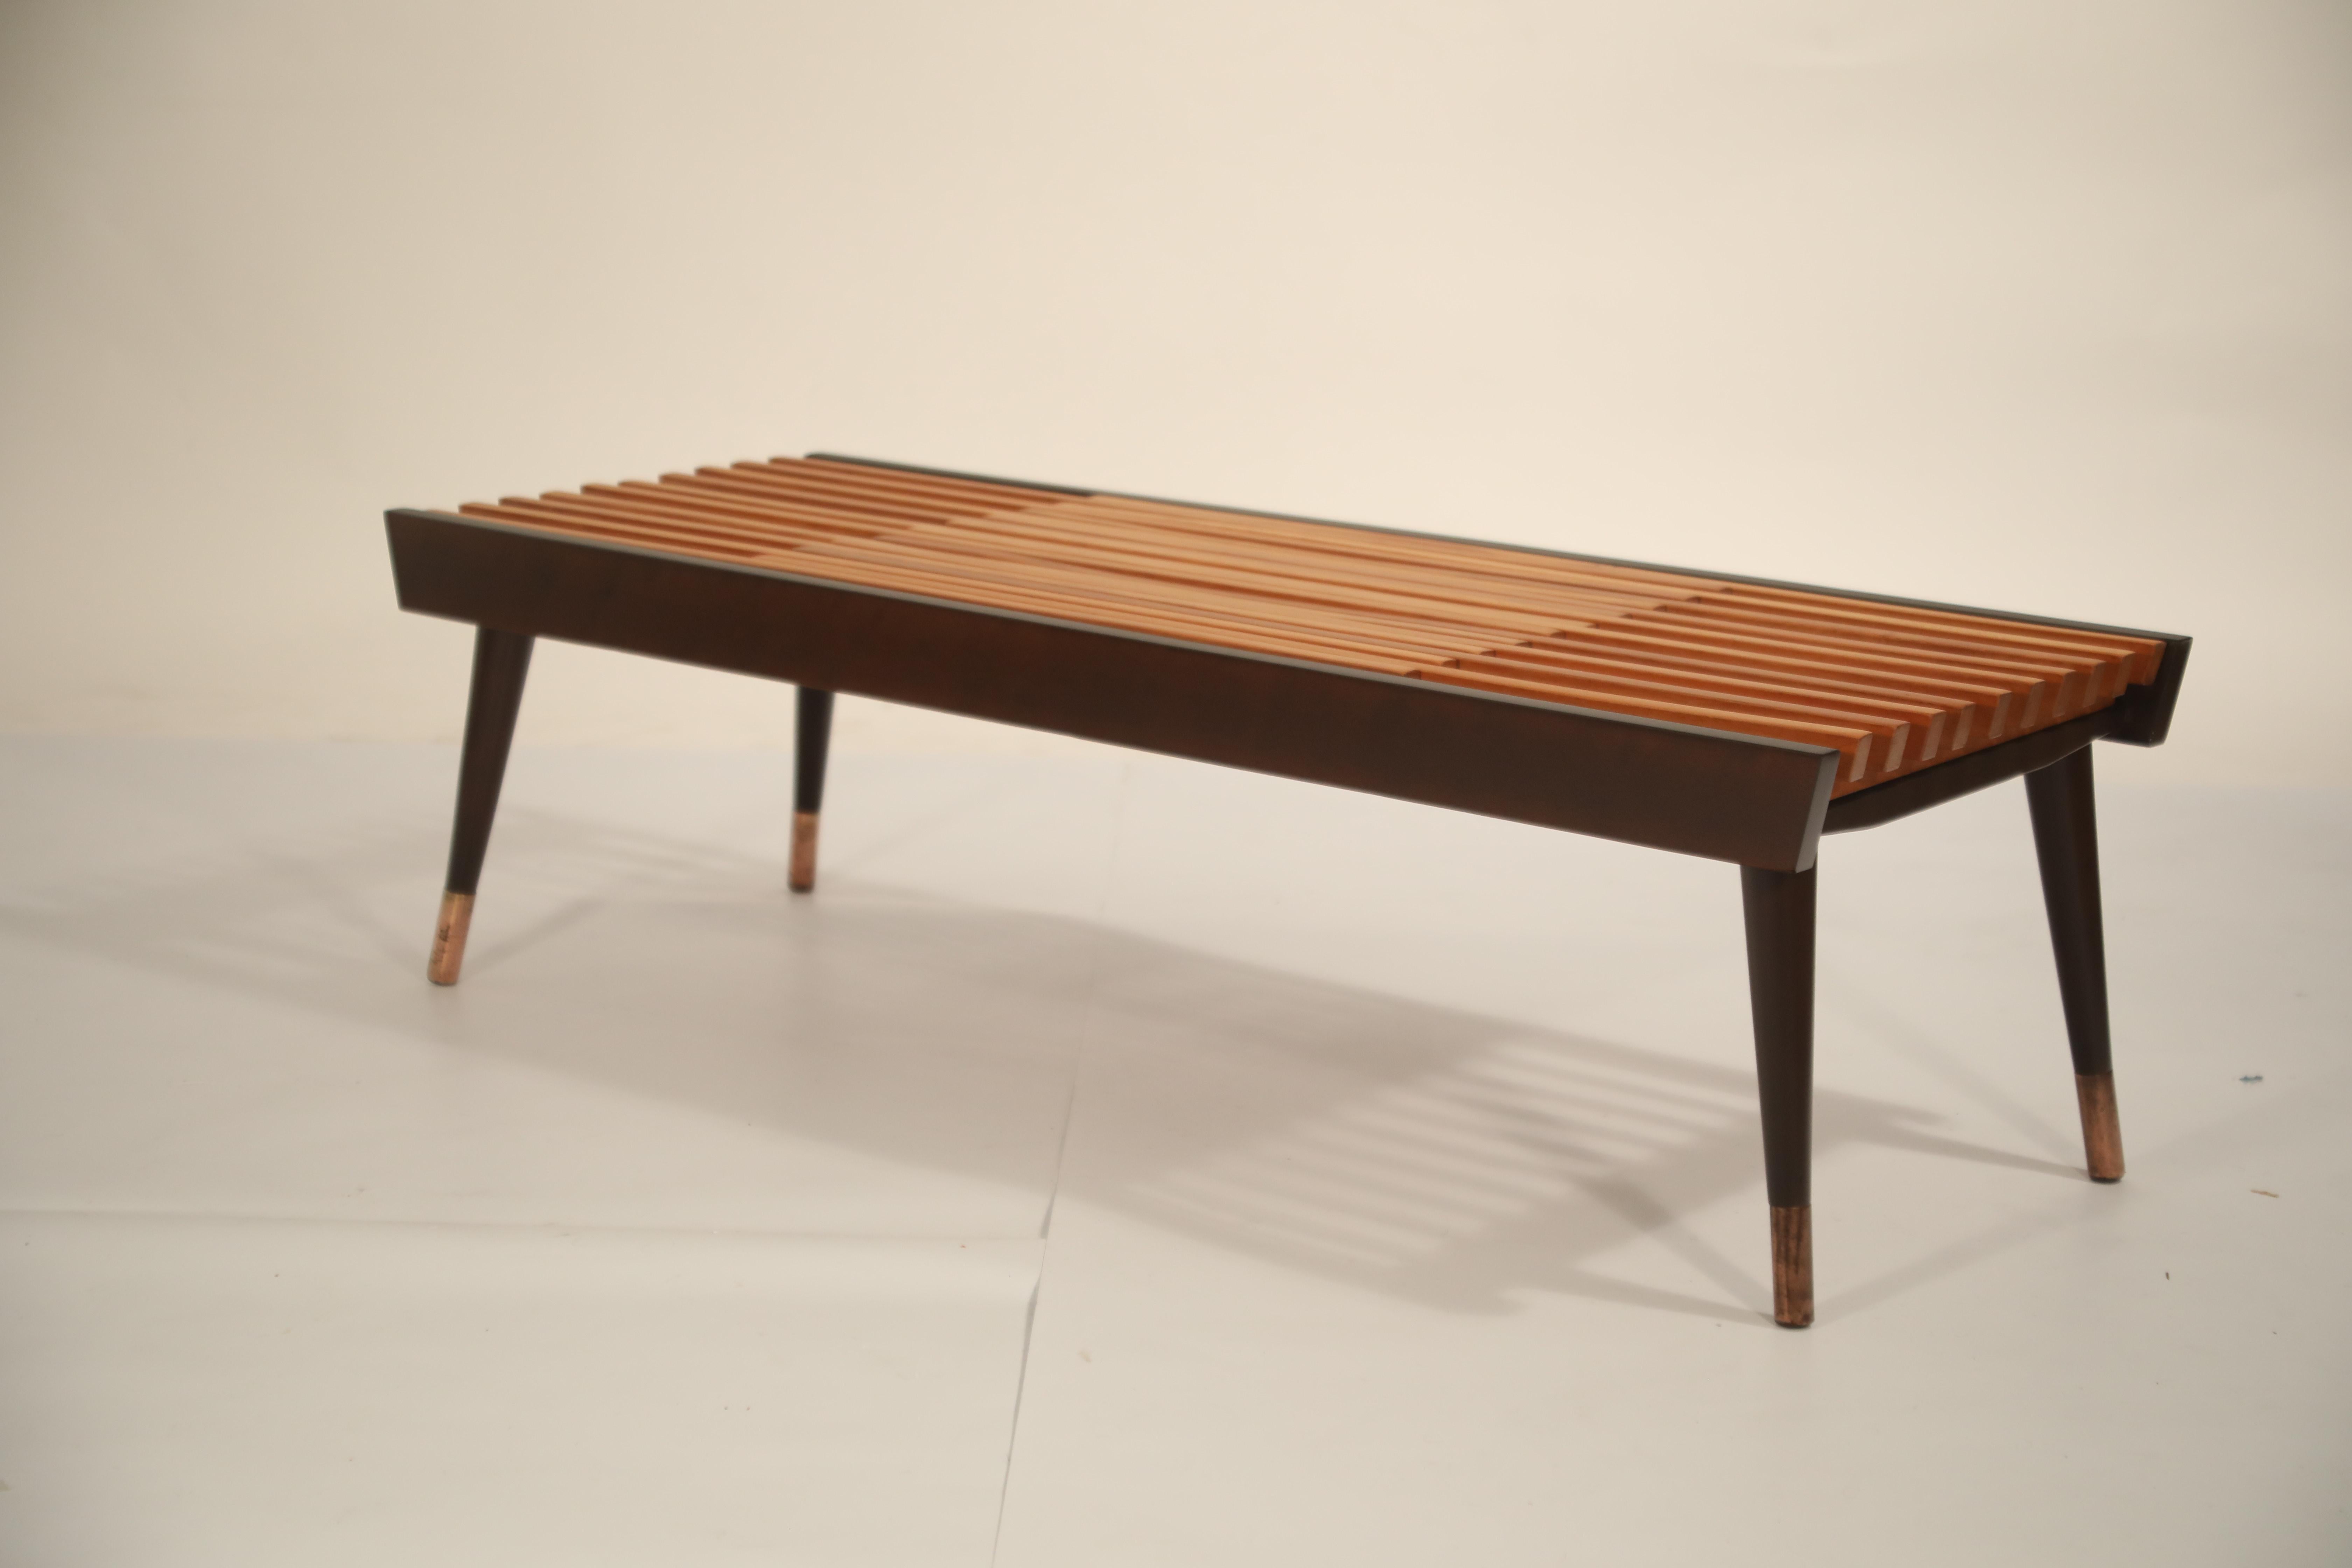 Extendable Slatted Wood Bench or Coffee Table by Maruni, 1950s Hiroshima Japan 3